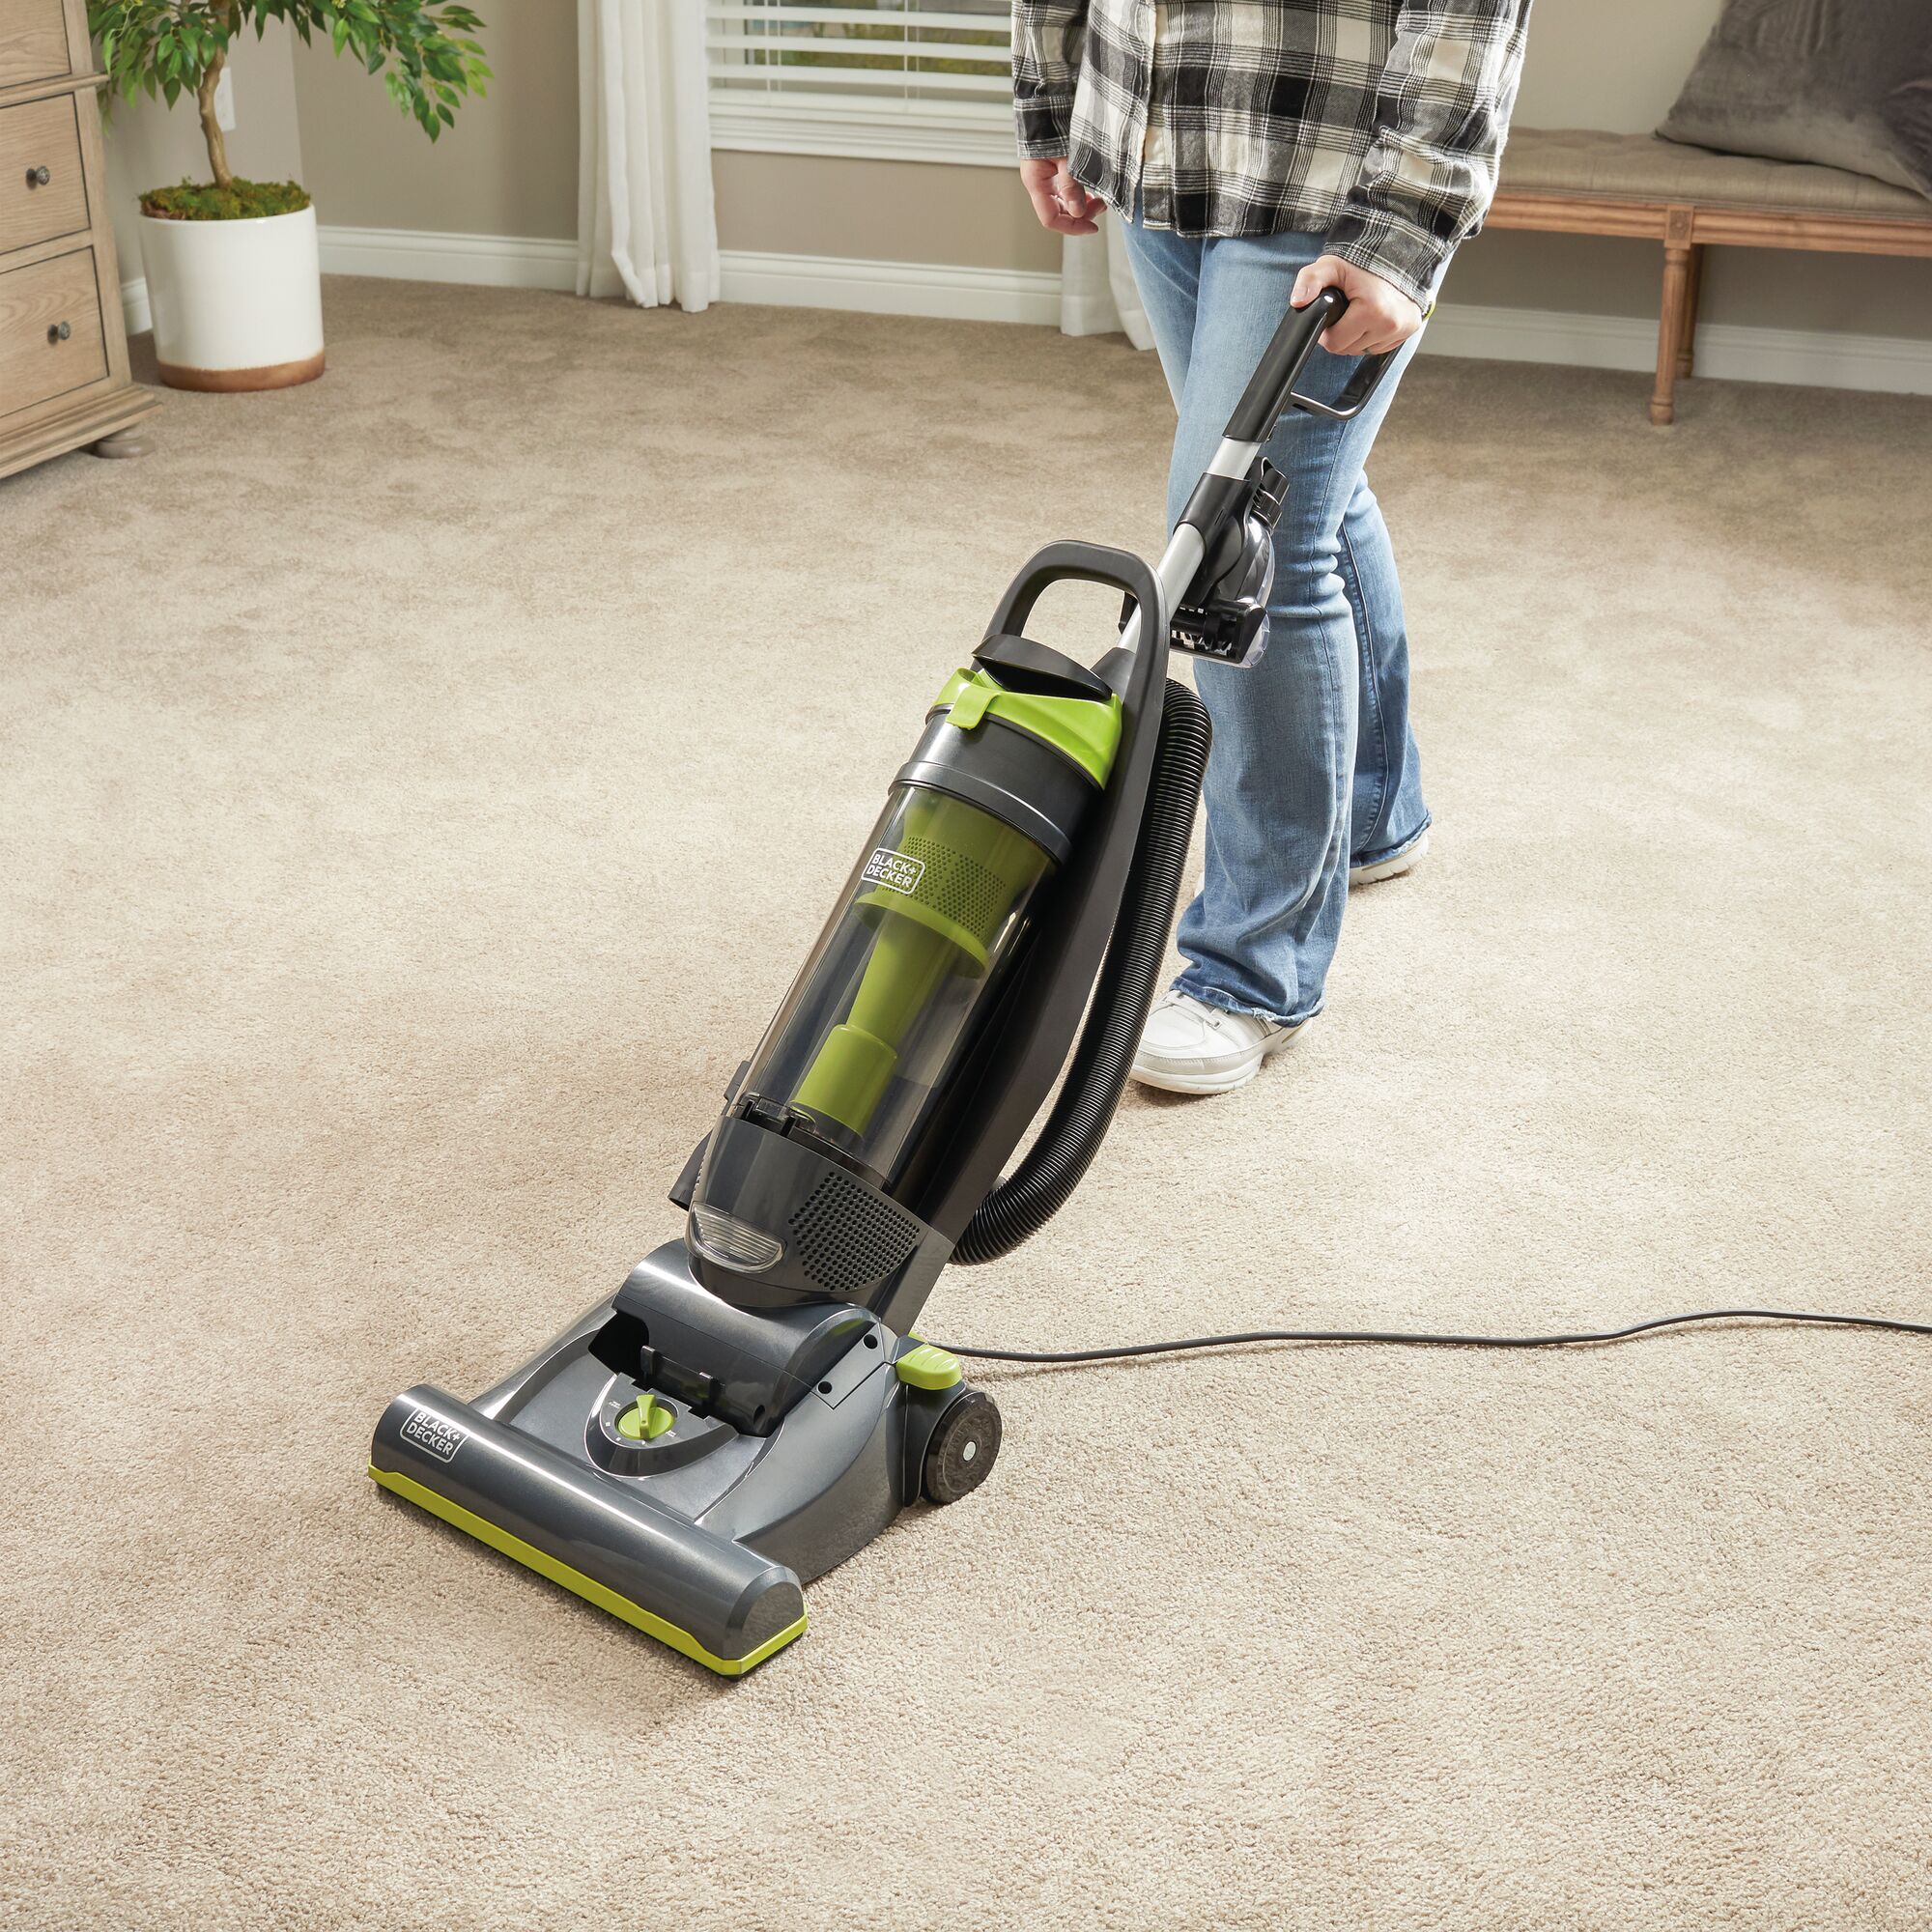 Person using the BLACK+DECKER upright vacuum on a living room floor of carpet